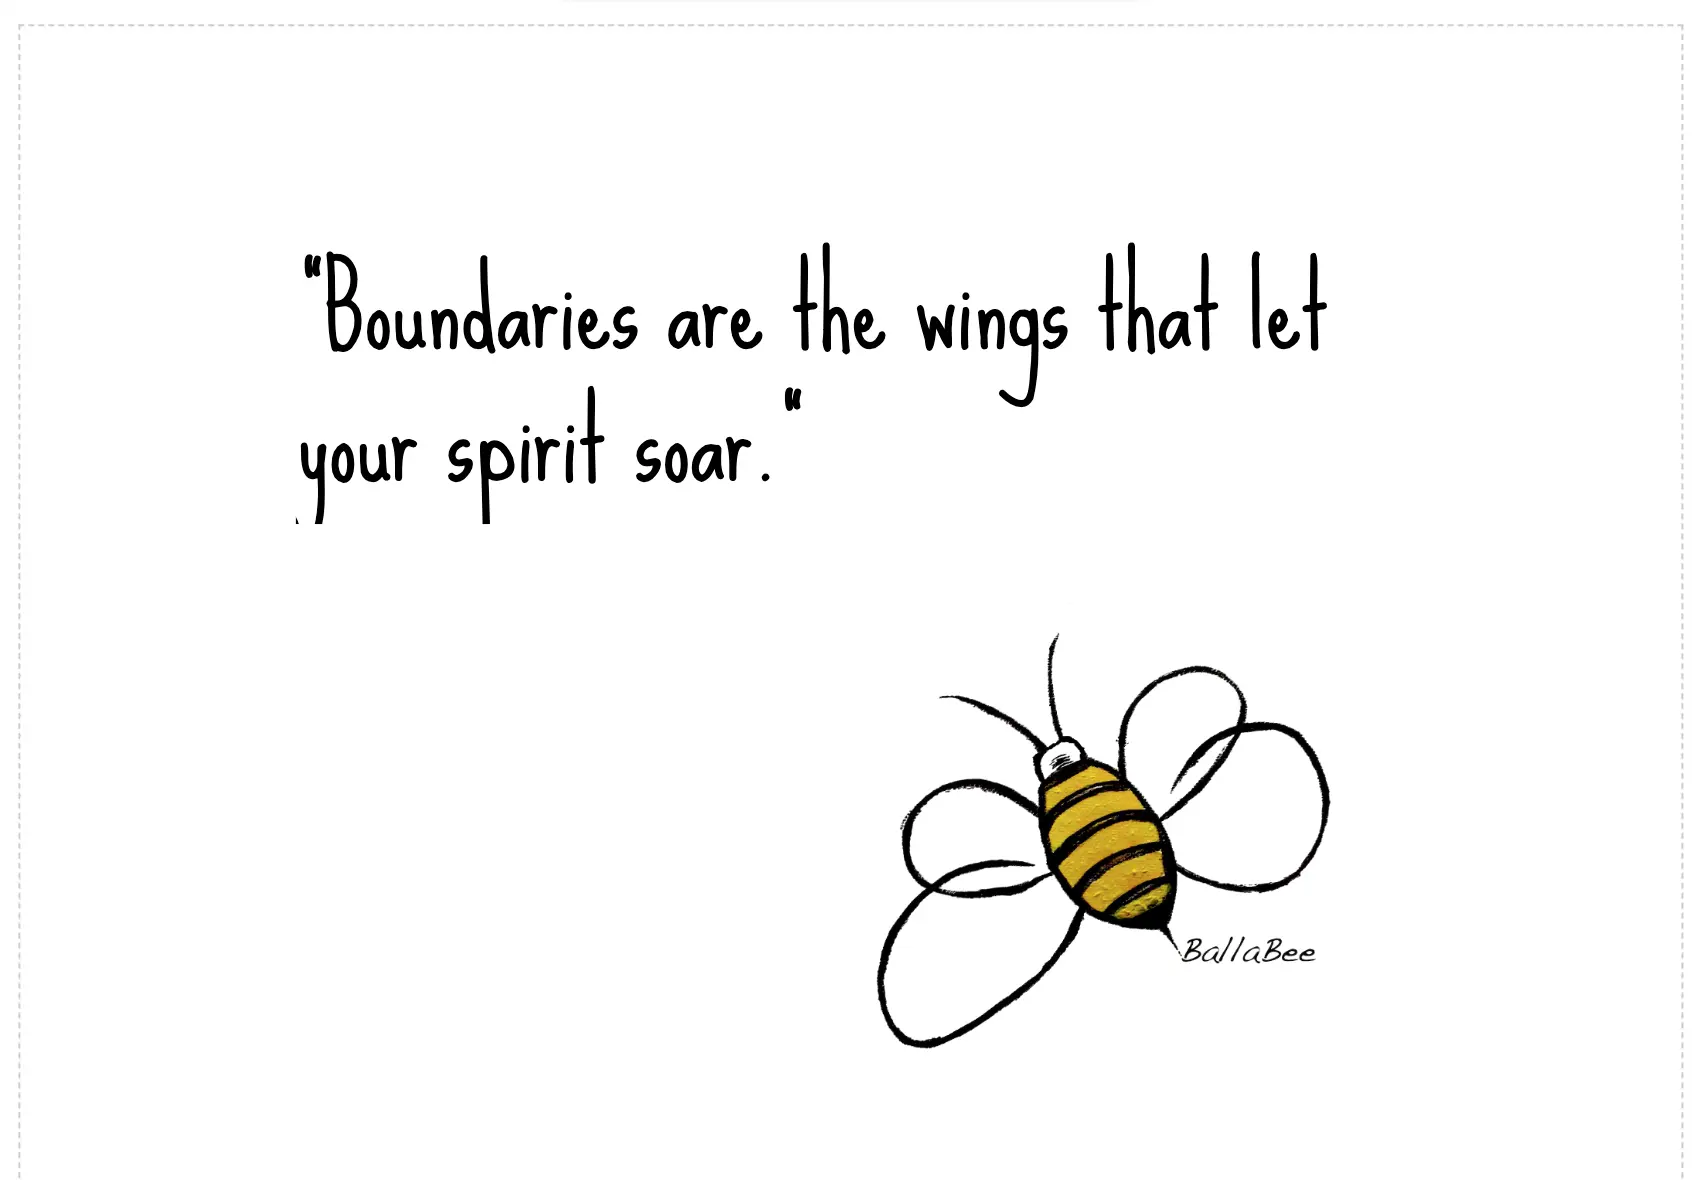 Boundaries are the wings that let your spirit soar.